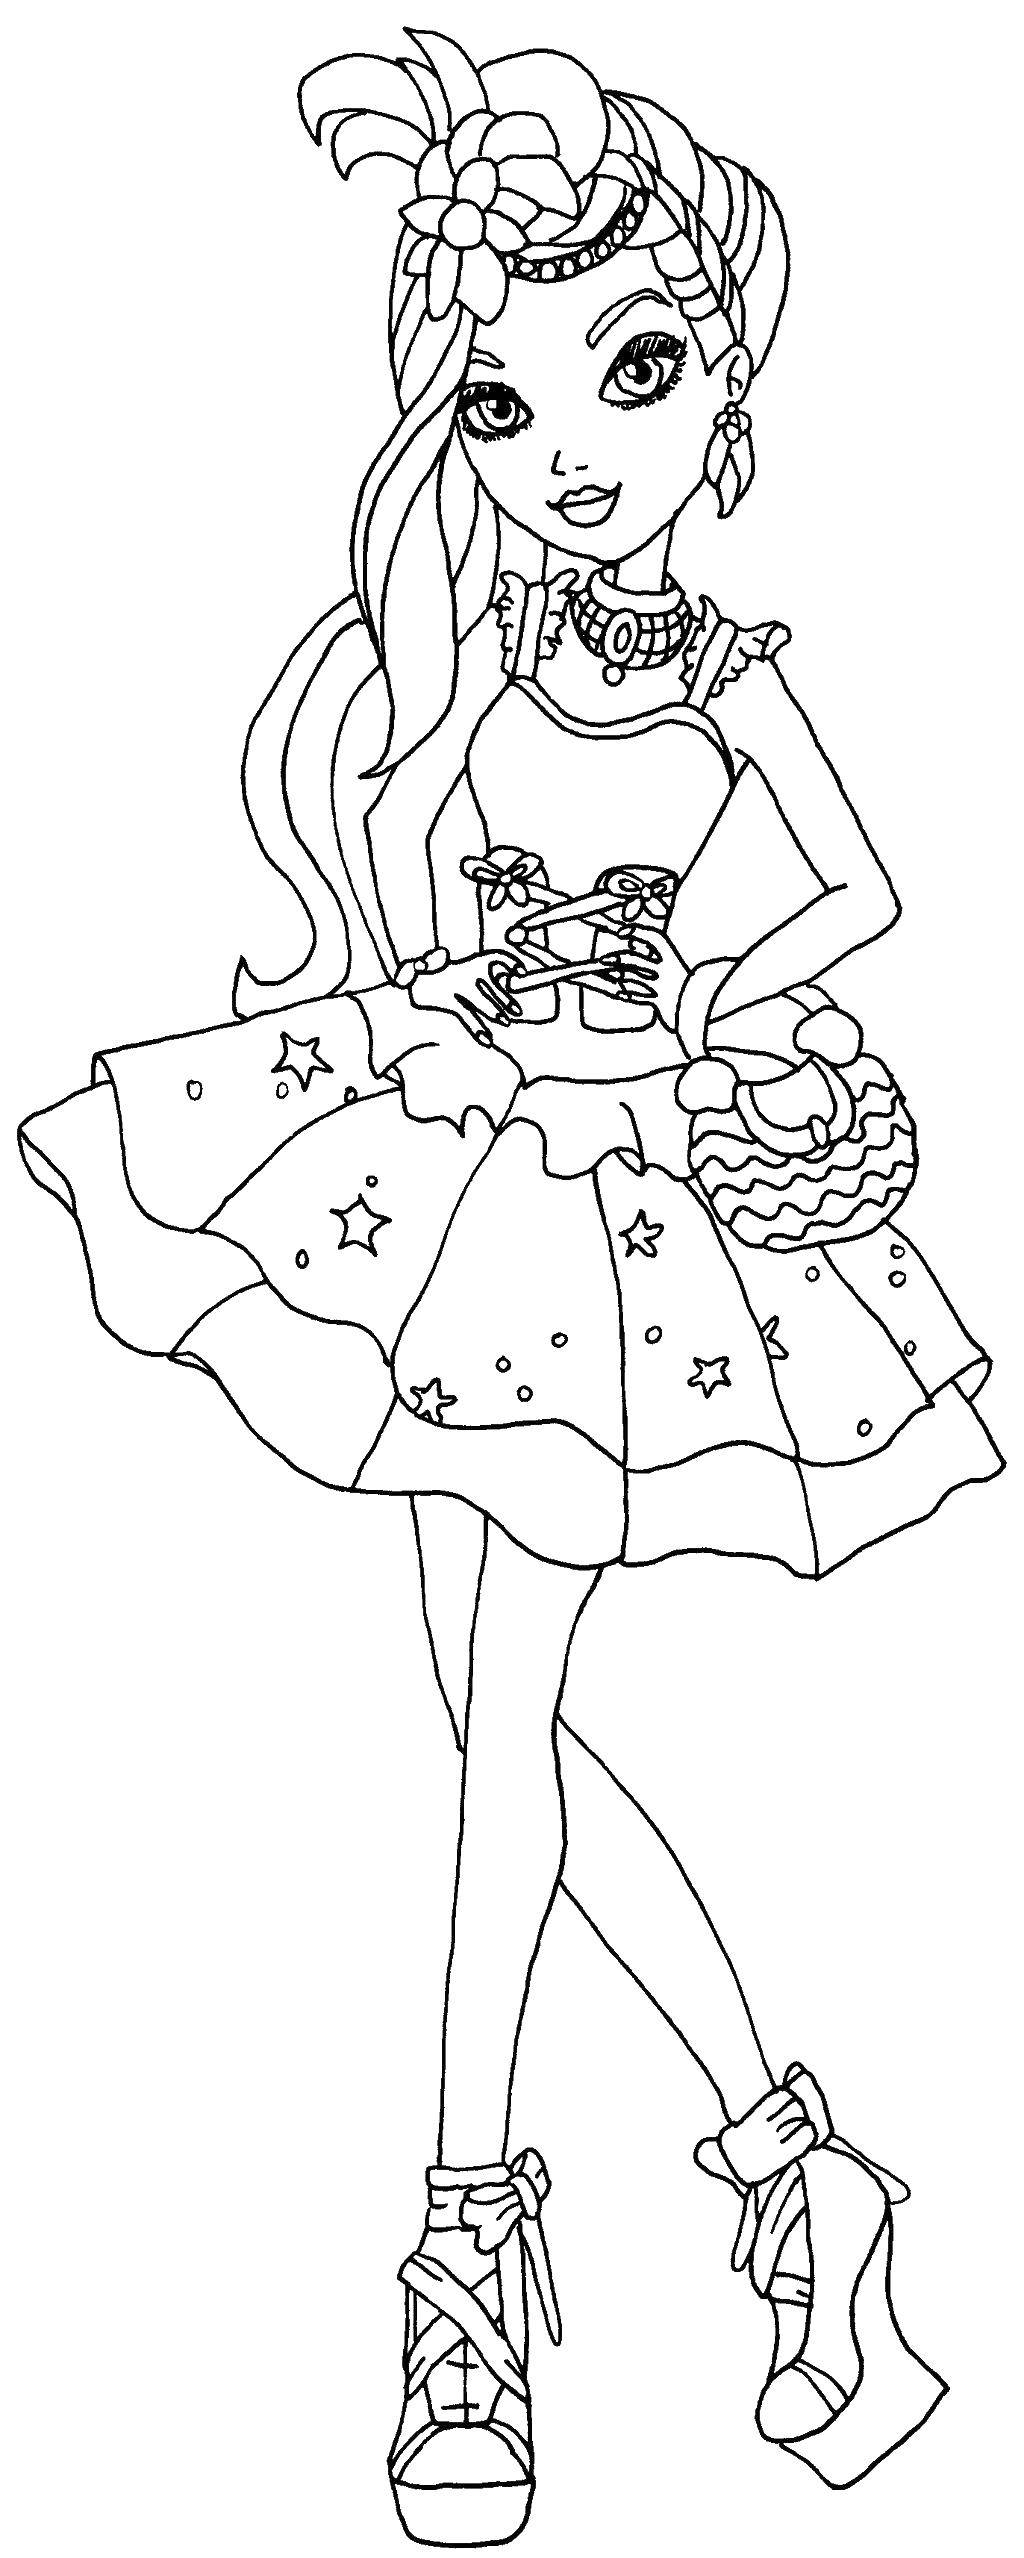 Coloring Duchess Swan Dutchess County the daughter of the Swan Princess Odette. Category eah school. Tags:  ever after high, Duchess Swan, Dutchess County Swan.